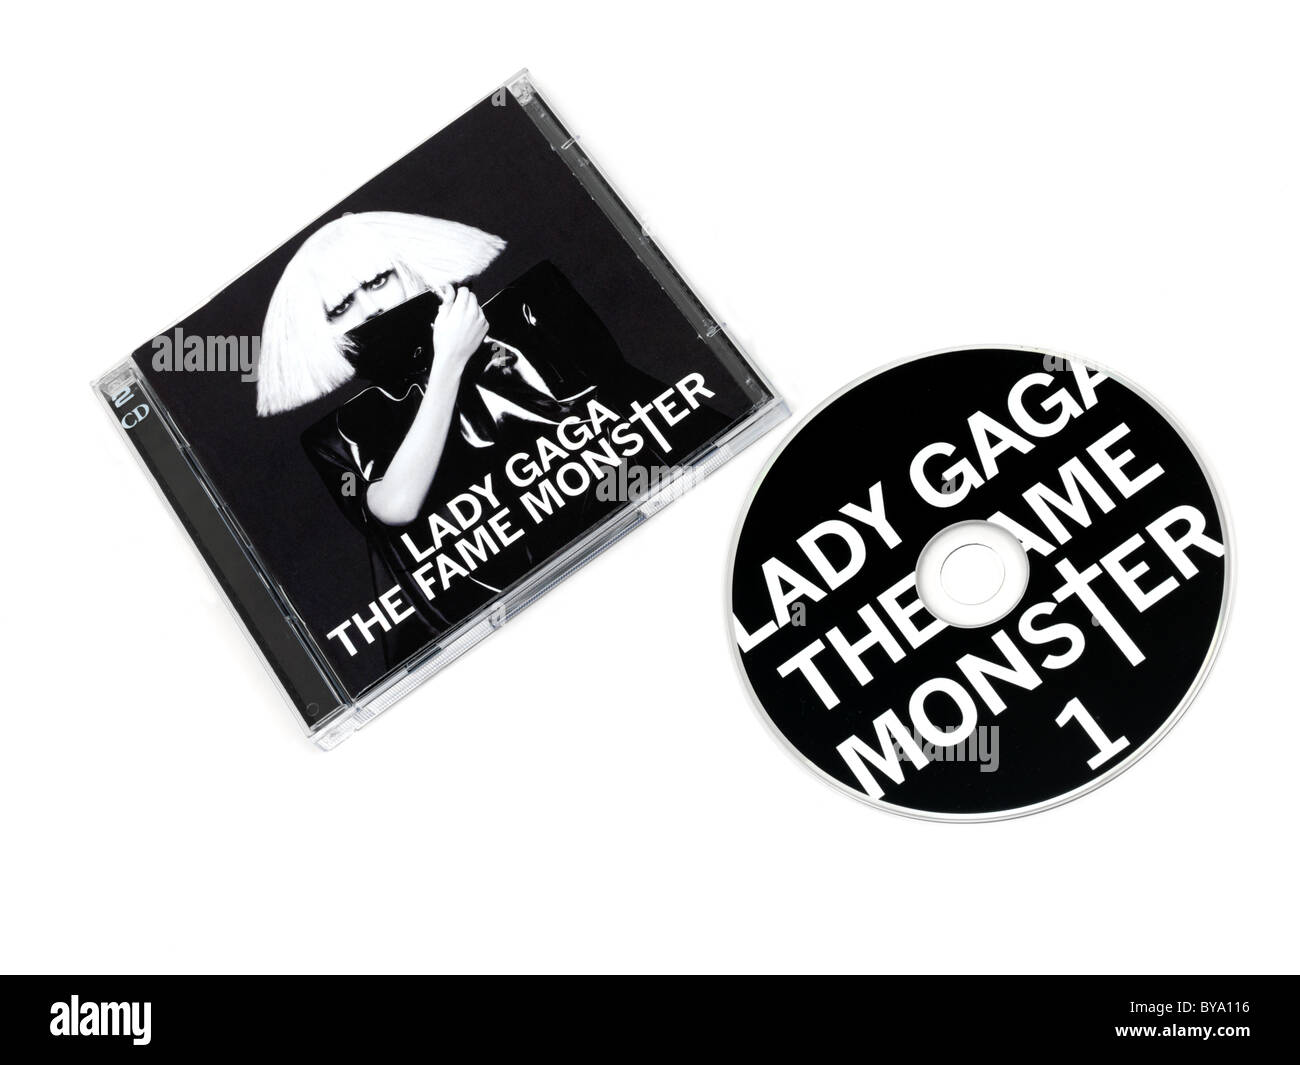 Lady Gaga The Fame Monster Compact Disc Stock Photo